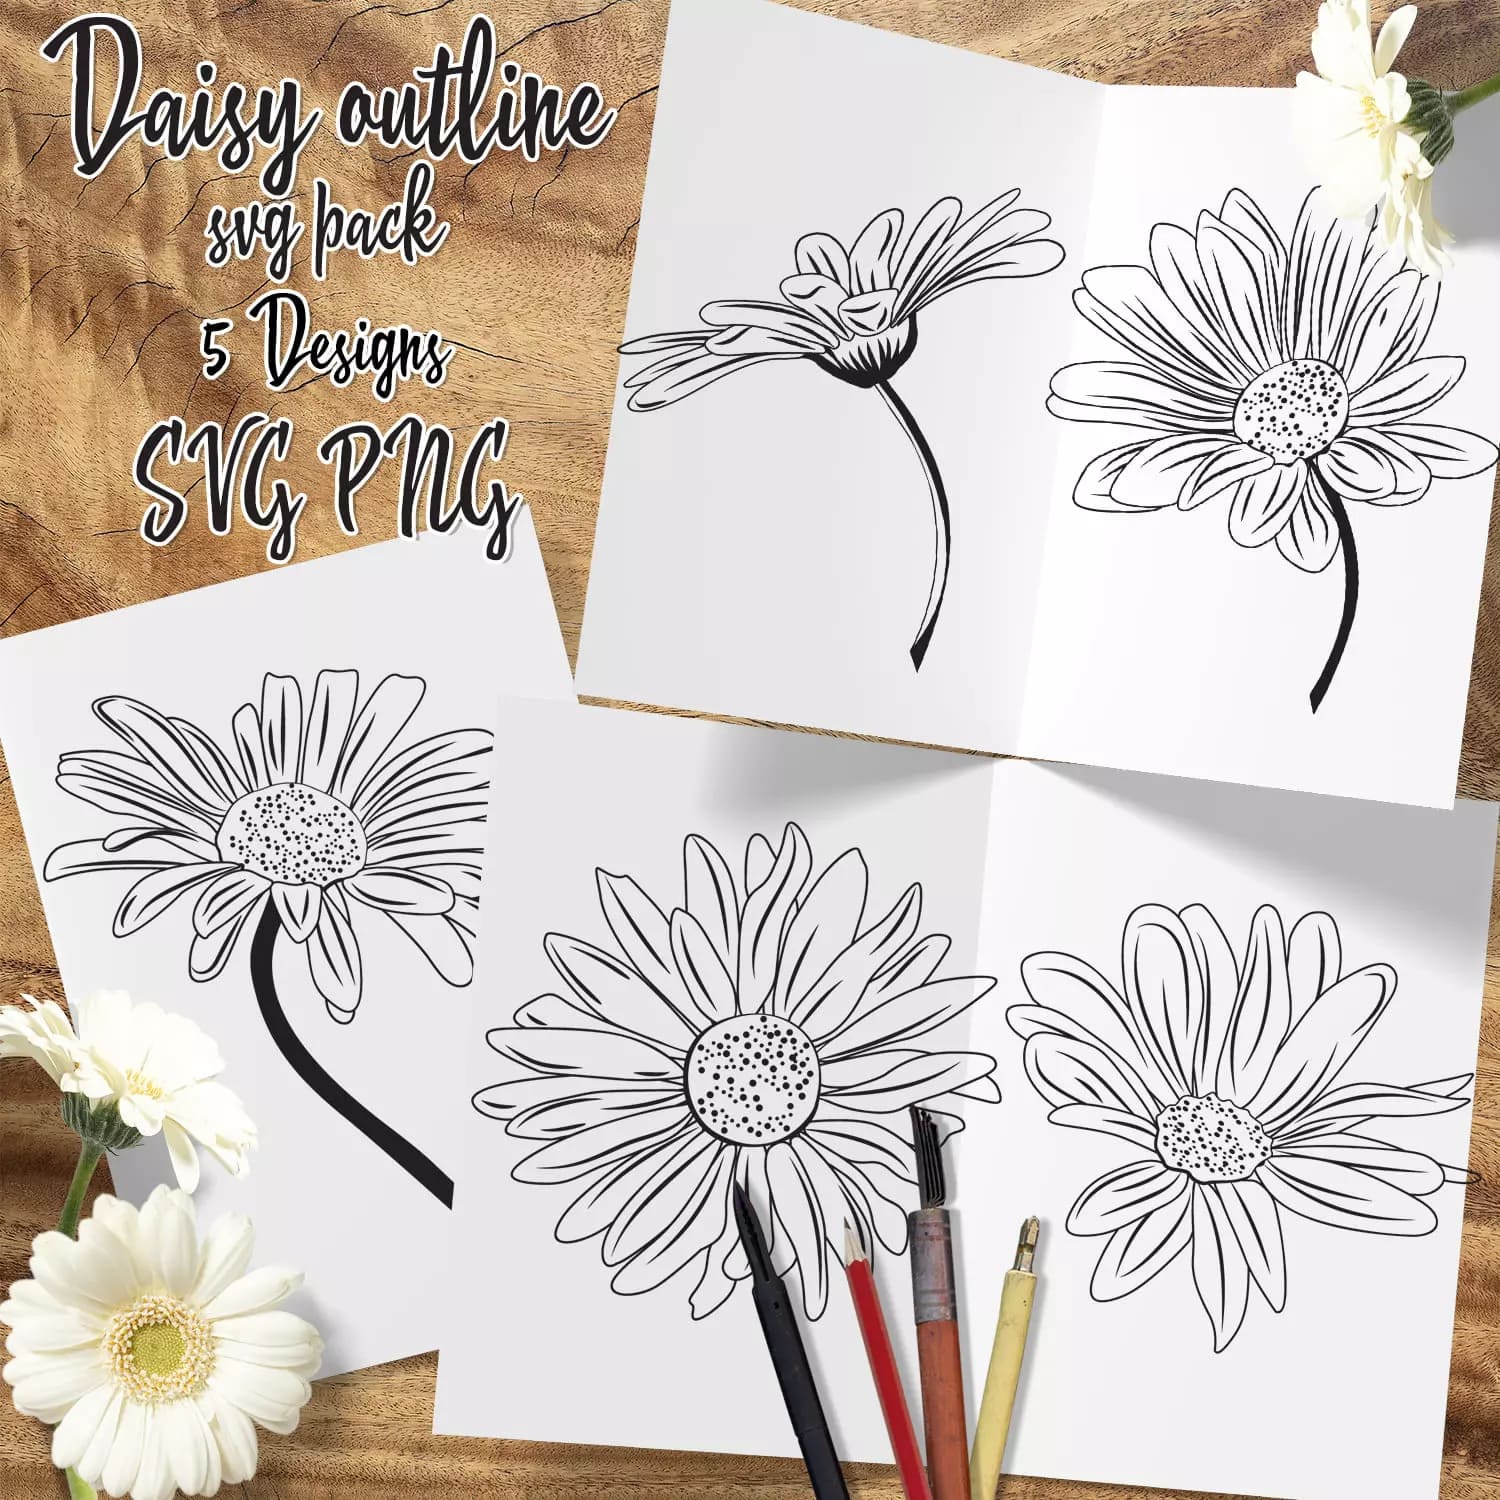 Daisy Outline SVG Preview 2.